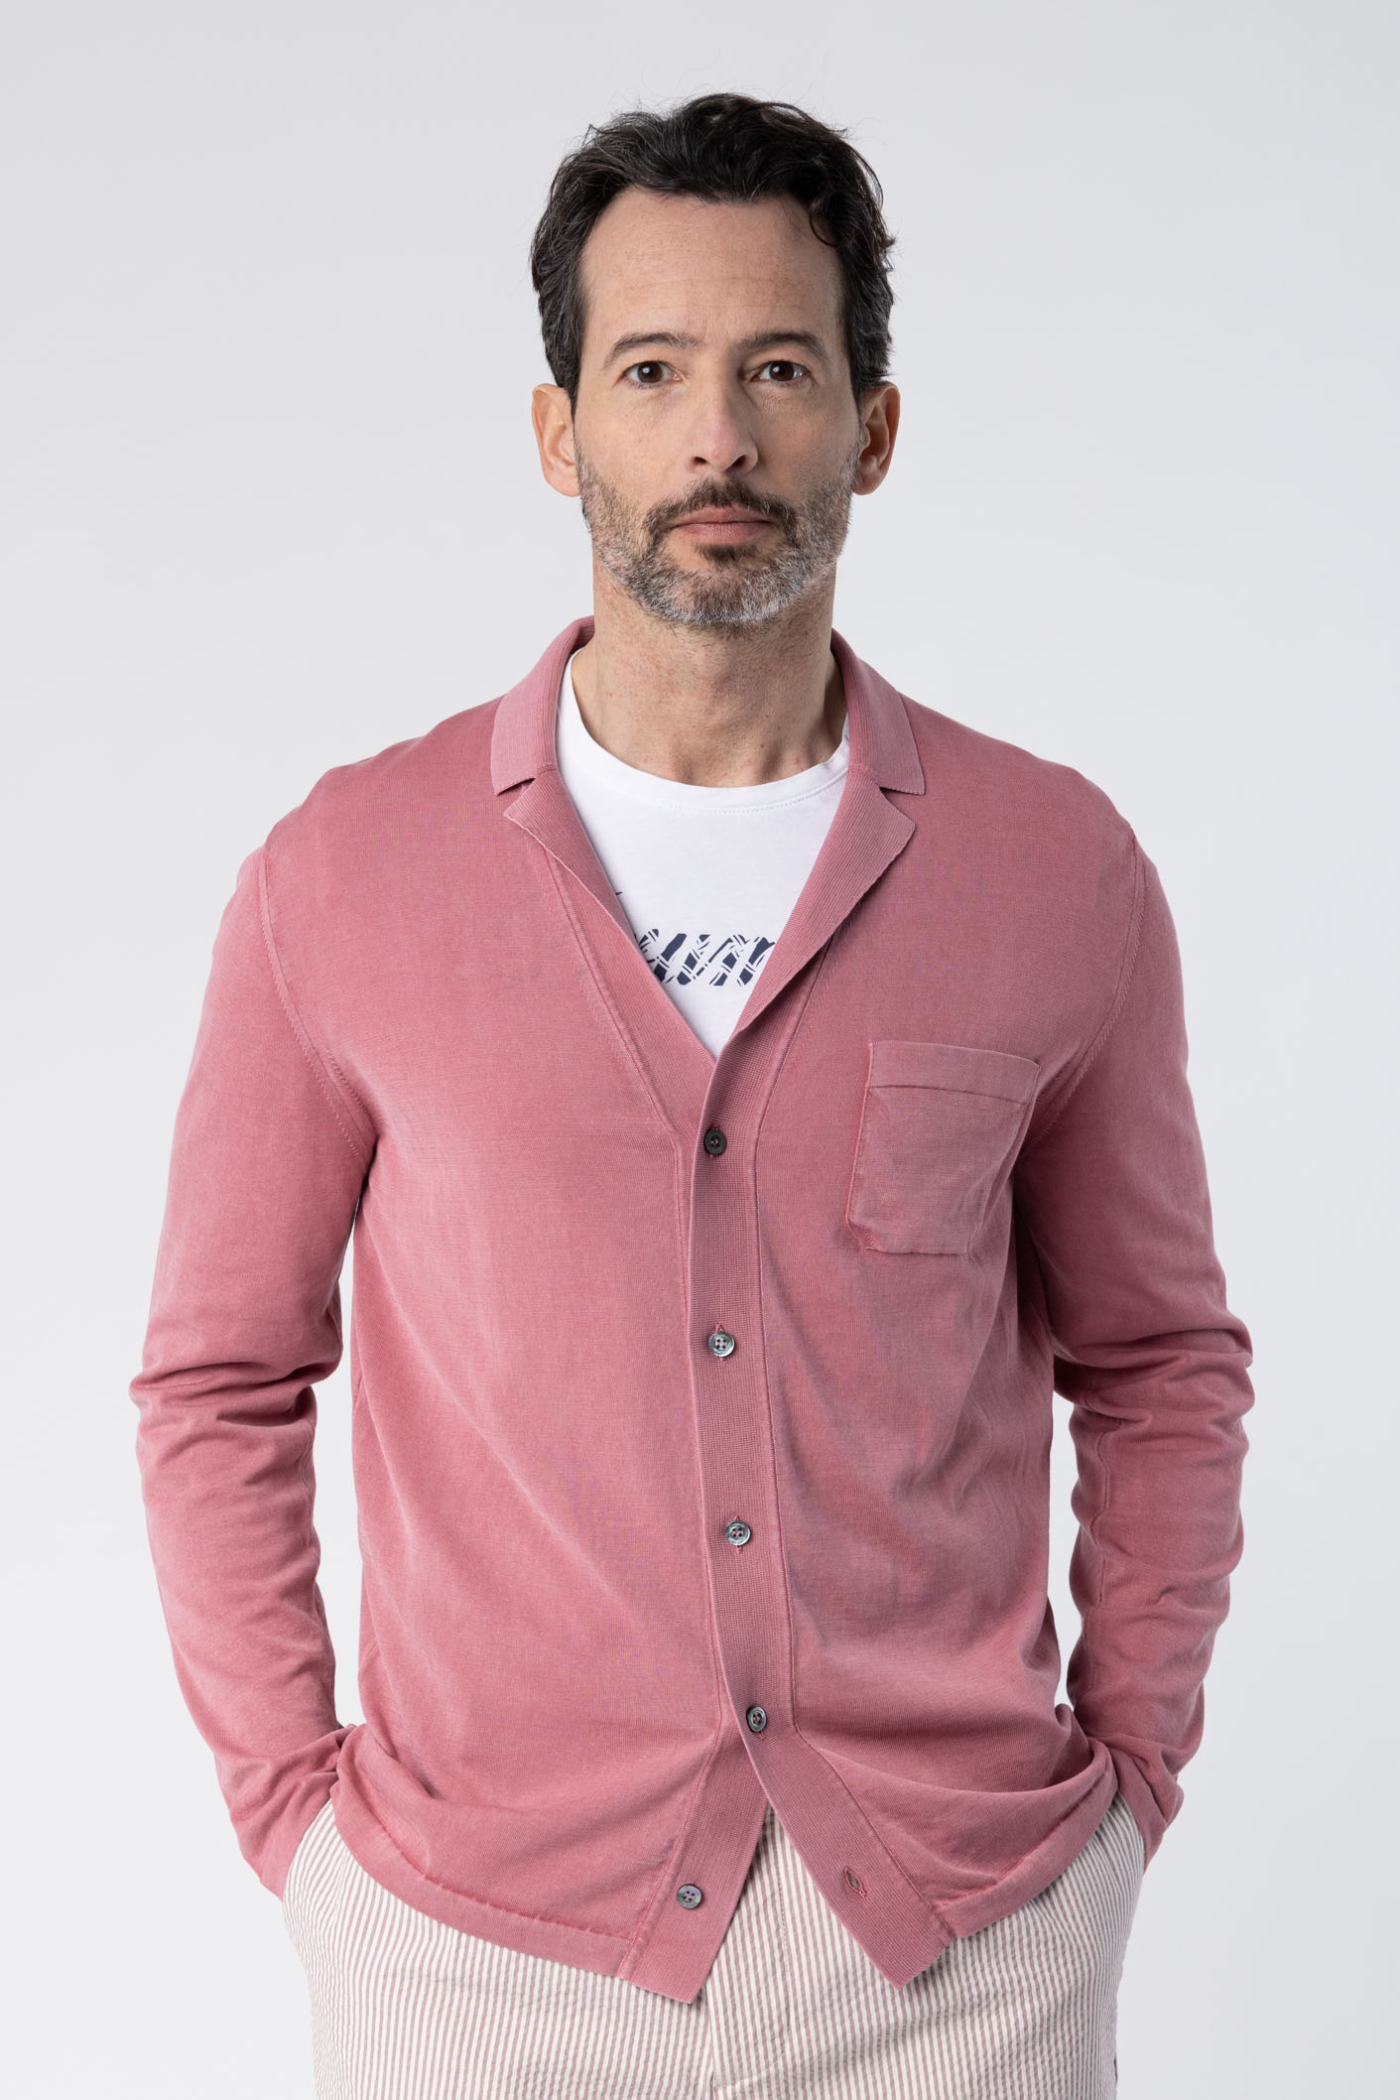 Bowling neck Shirt with breast pocket